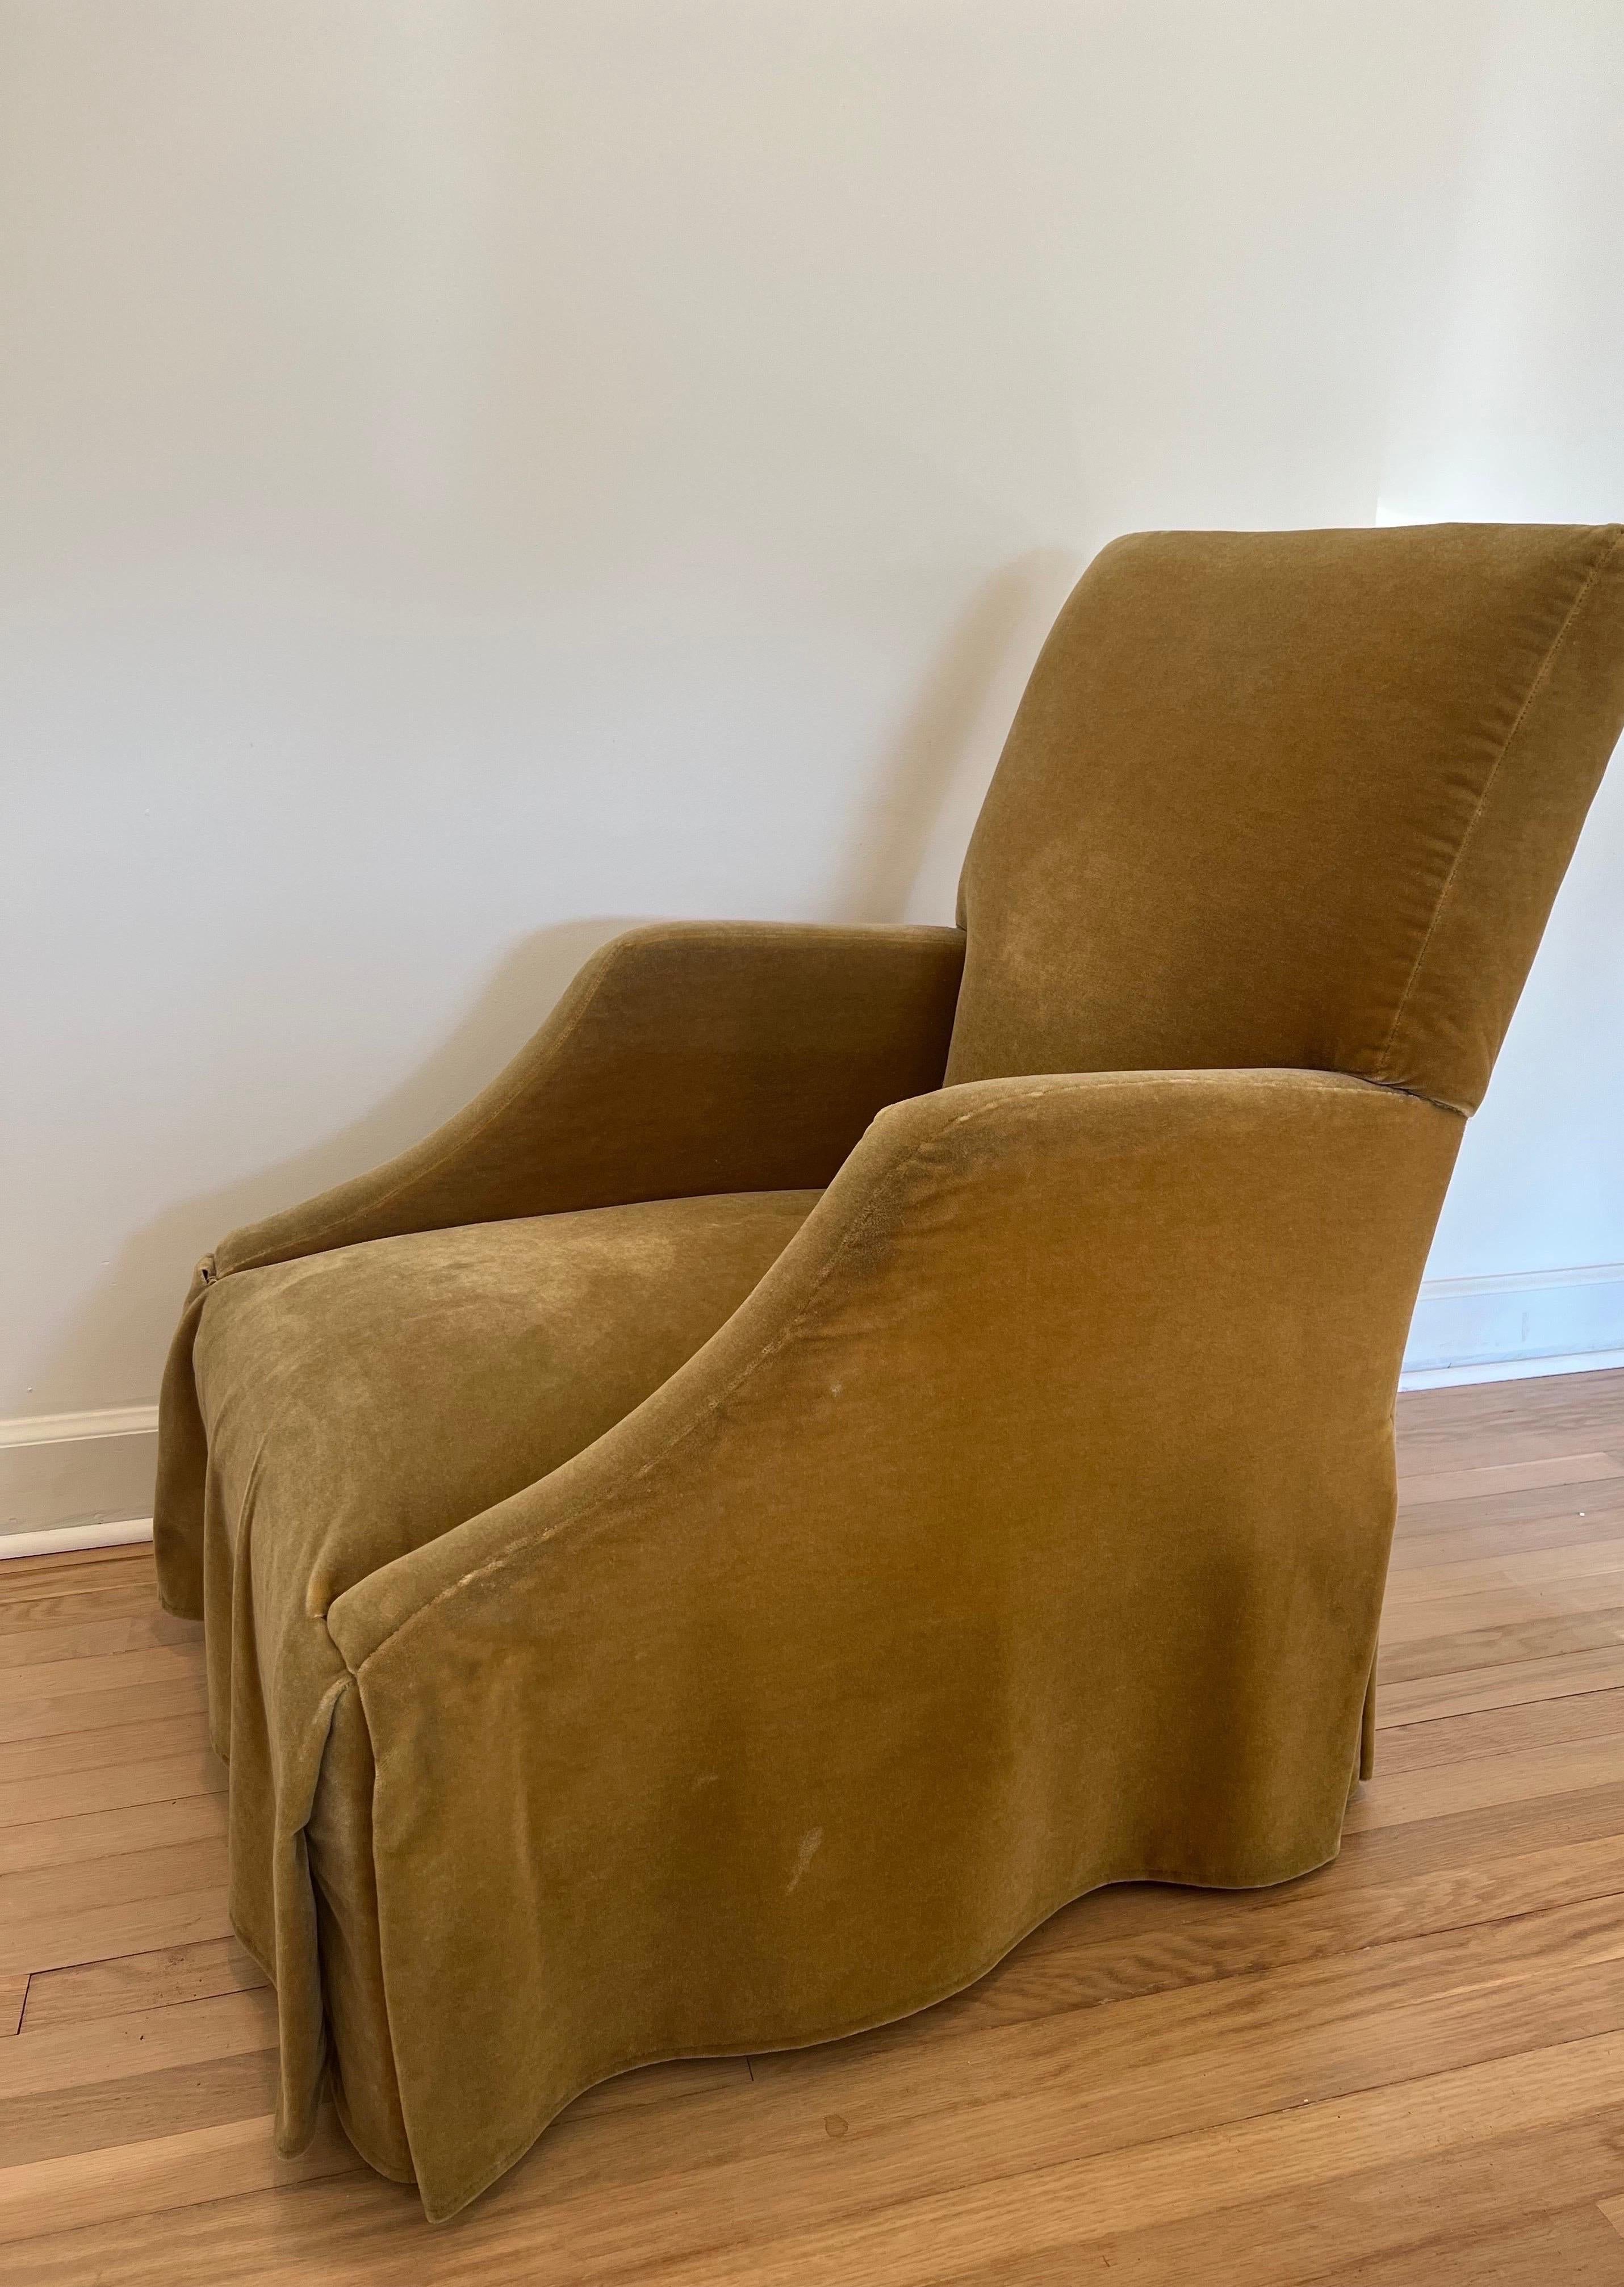 Classic grand lounger armchair upholstered in a skirted whiskey mohair. Made by Lee Industries, circa early 2000s.

Deep seated with contemporary lines.
Please note the corner hem at seat and skirt needs repair. Make offer on this gorgeous chair.